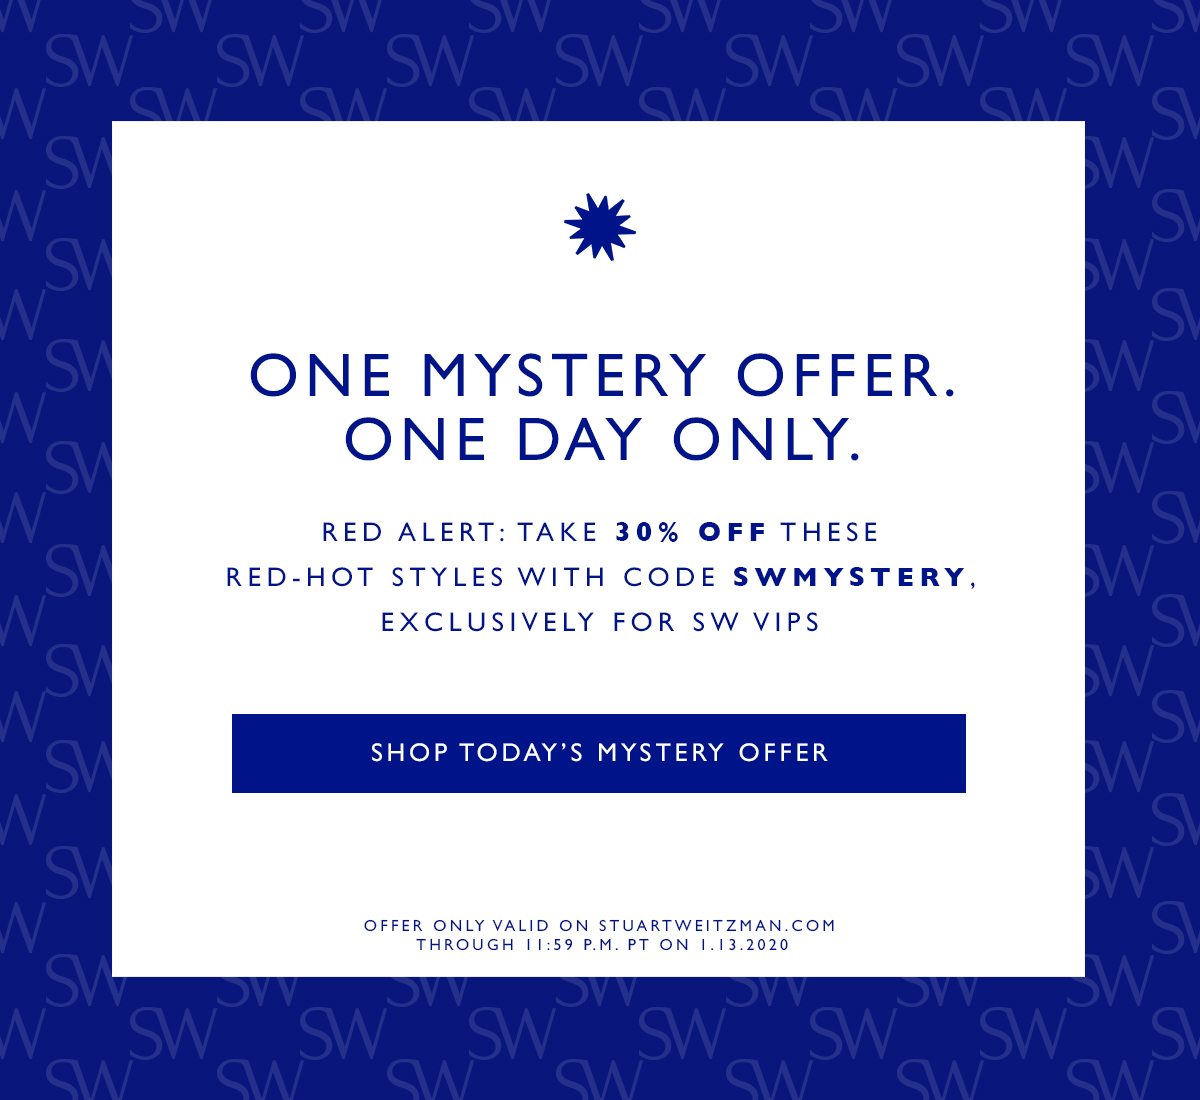 ONE MYSTERY OFFER. ONE DAY ONLY. SHOP TODAY'S MYSTERY OFFER